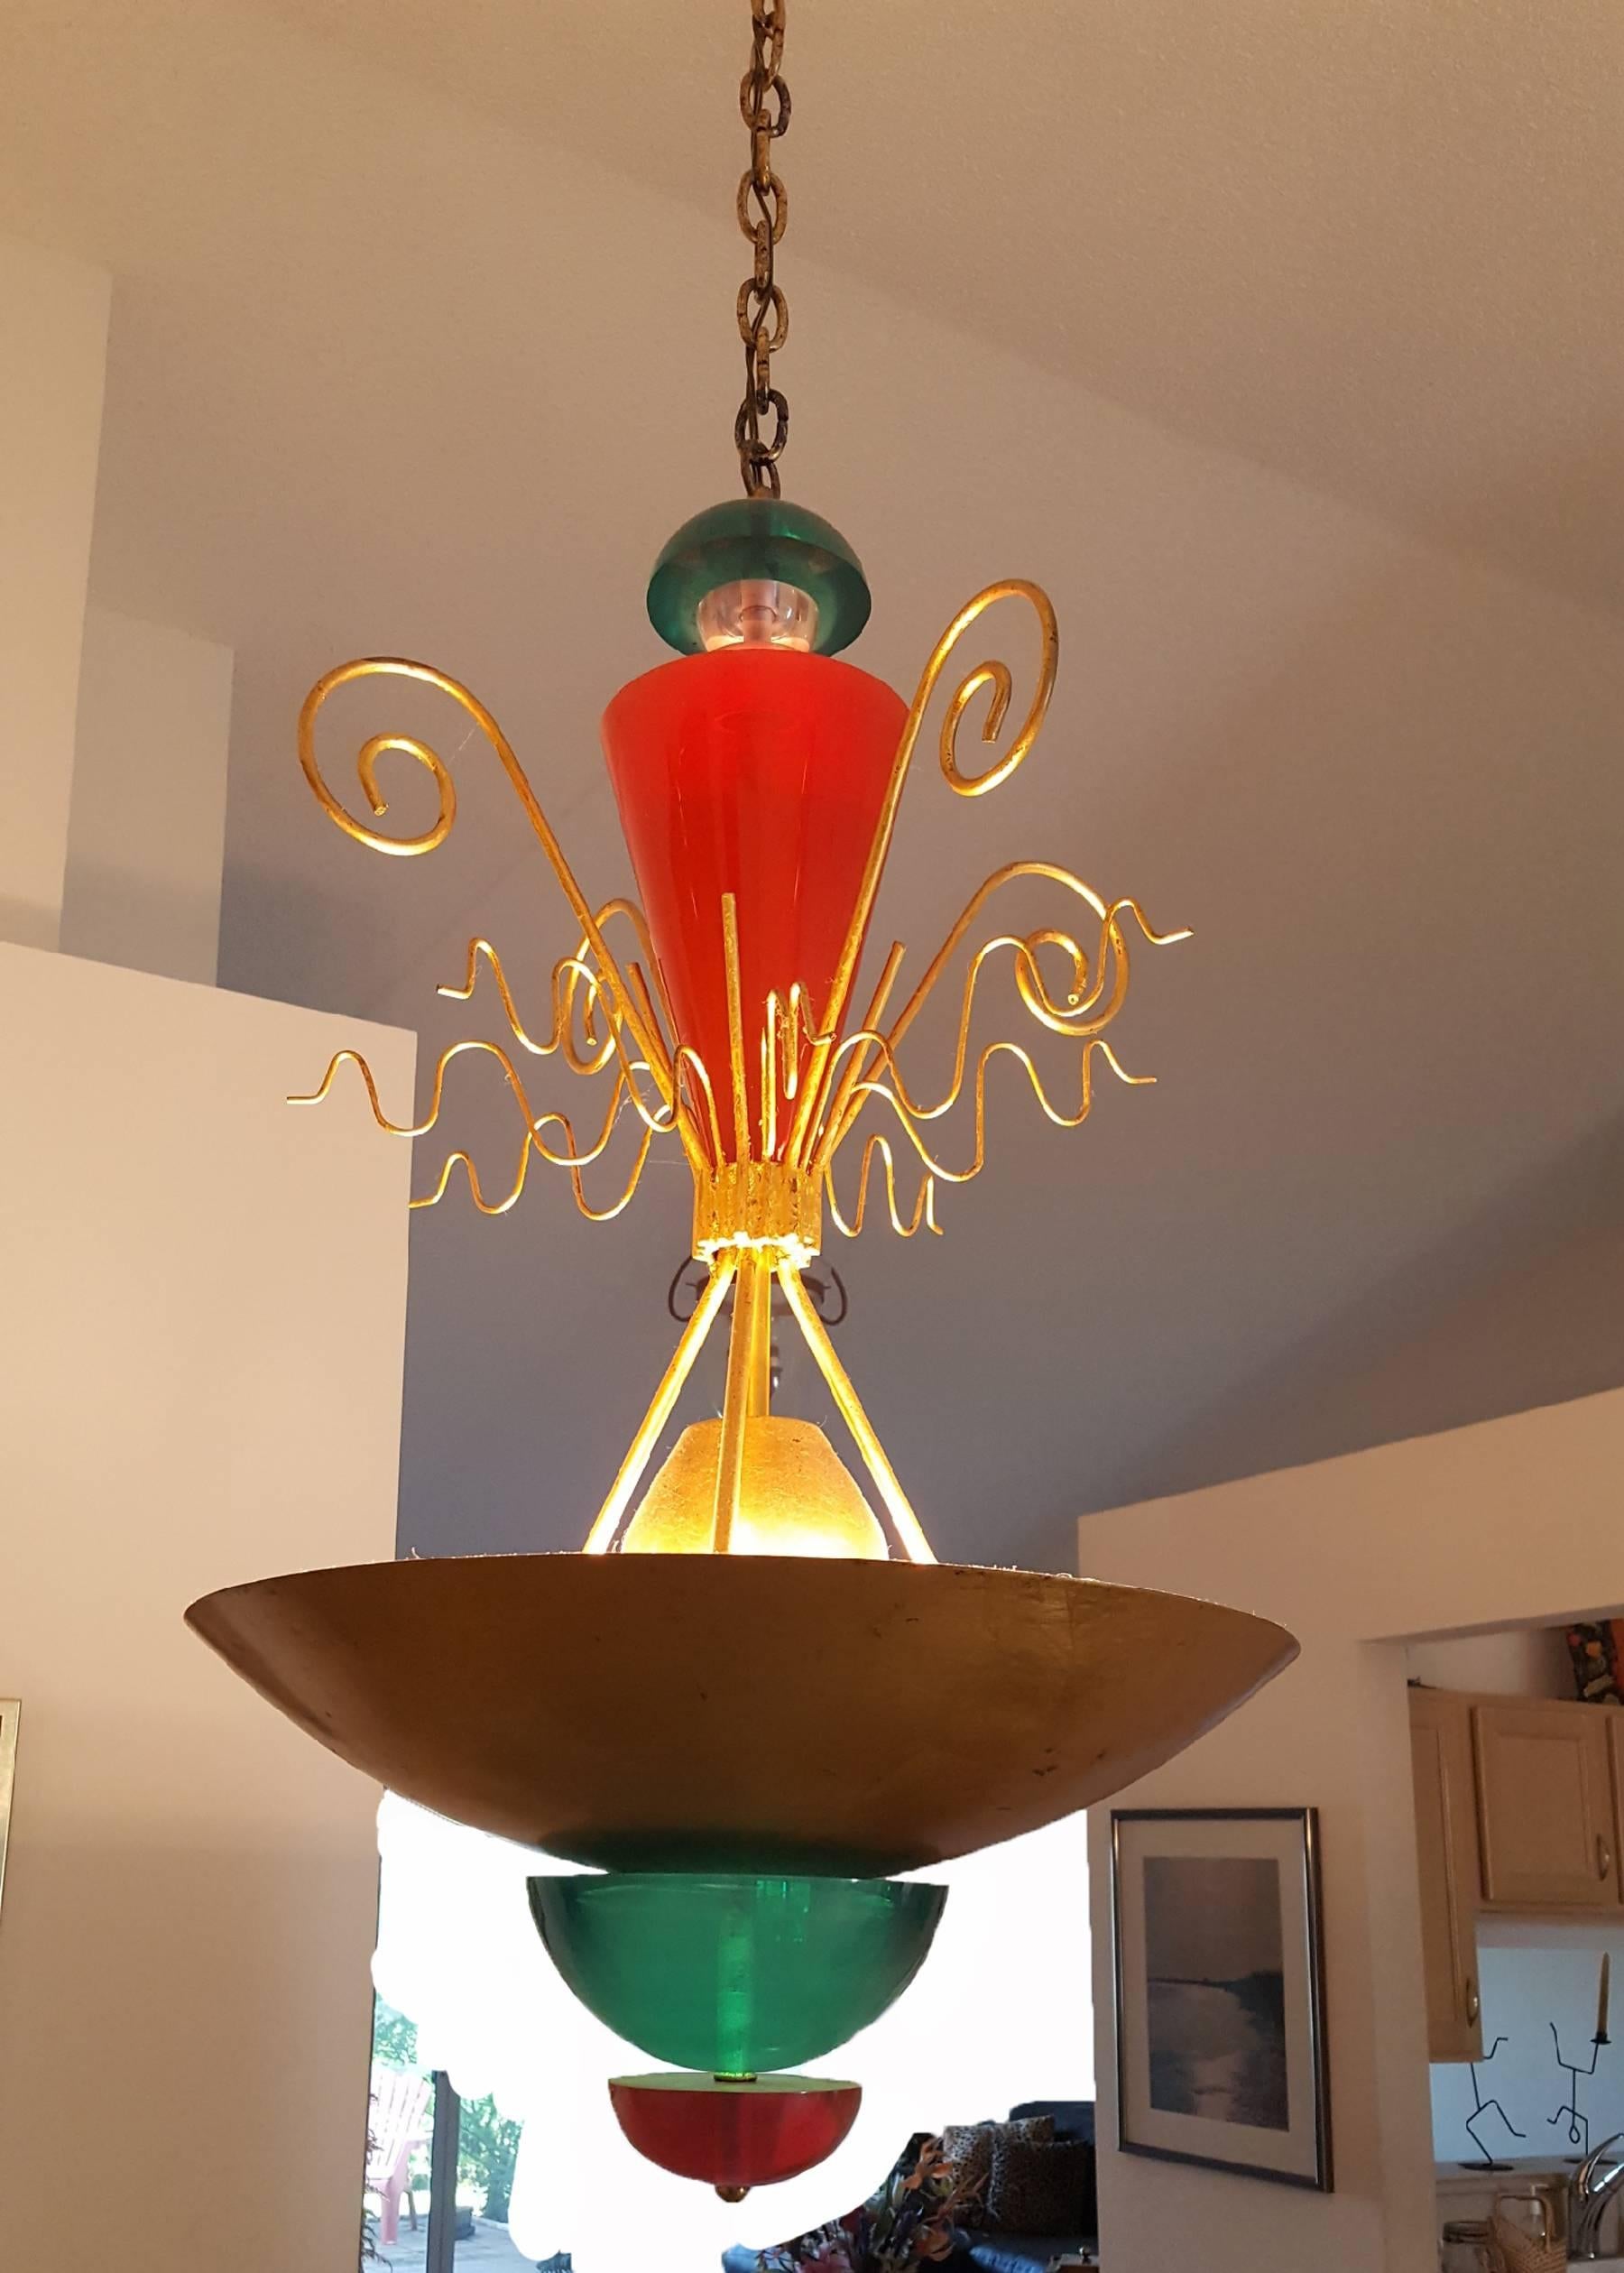 Vintage Van Teal Lucite chandelier light fixture. Colorful Lucite and finished metal chandelier by Van Teal post modern design. In the style of Ettore Sottsass Memphis style design, 34 inches high by 18 inches wide.